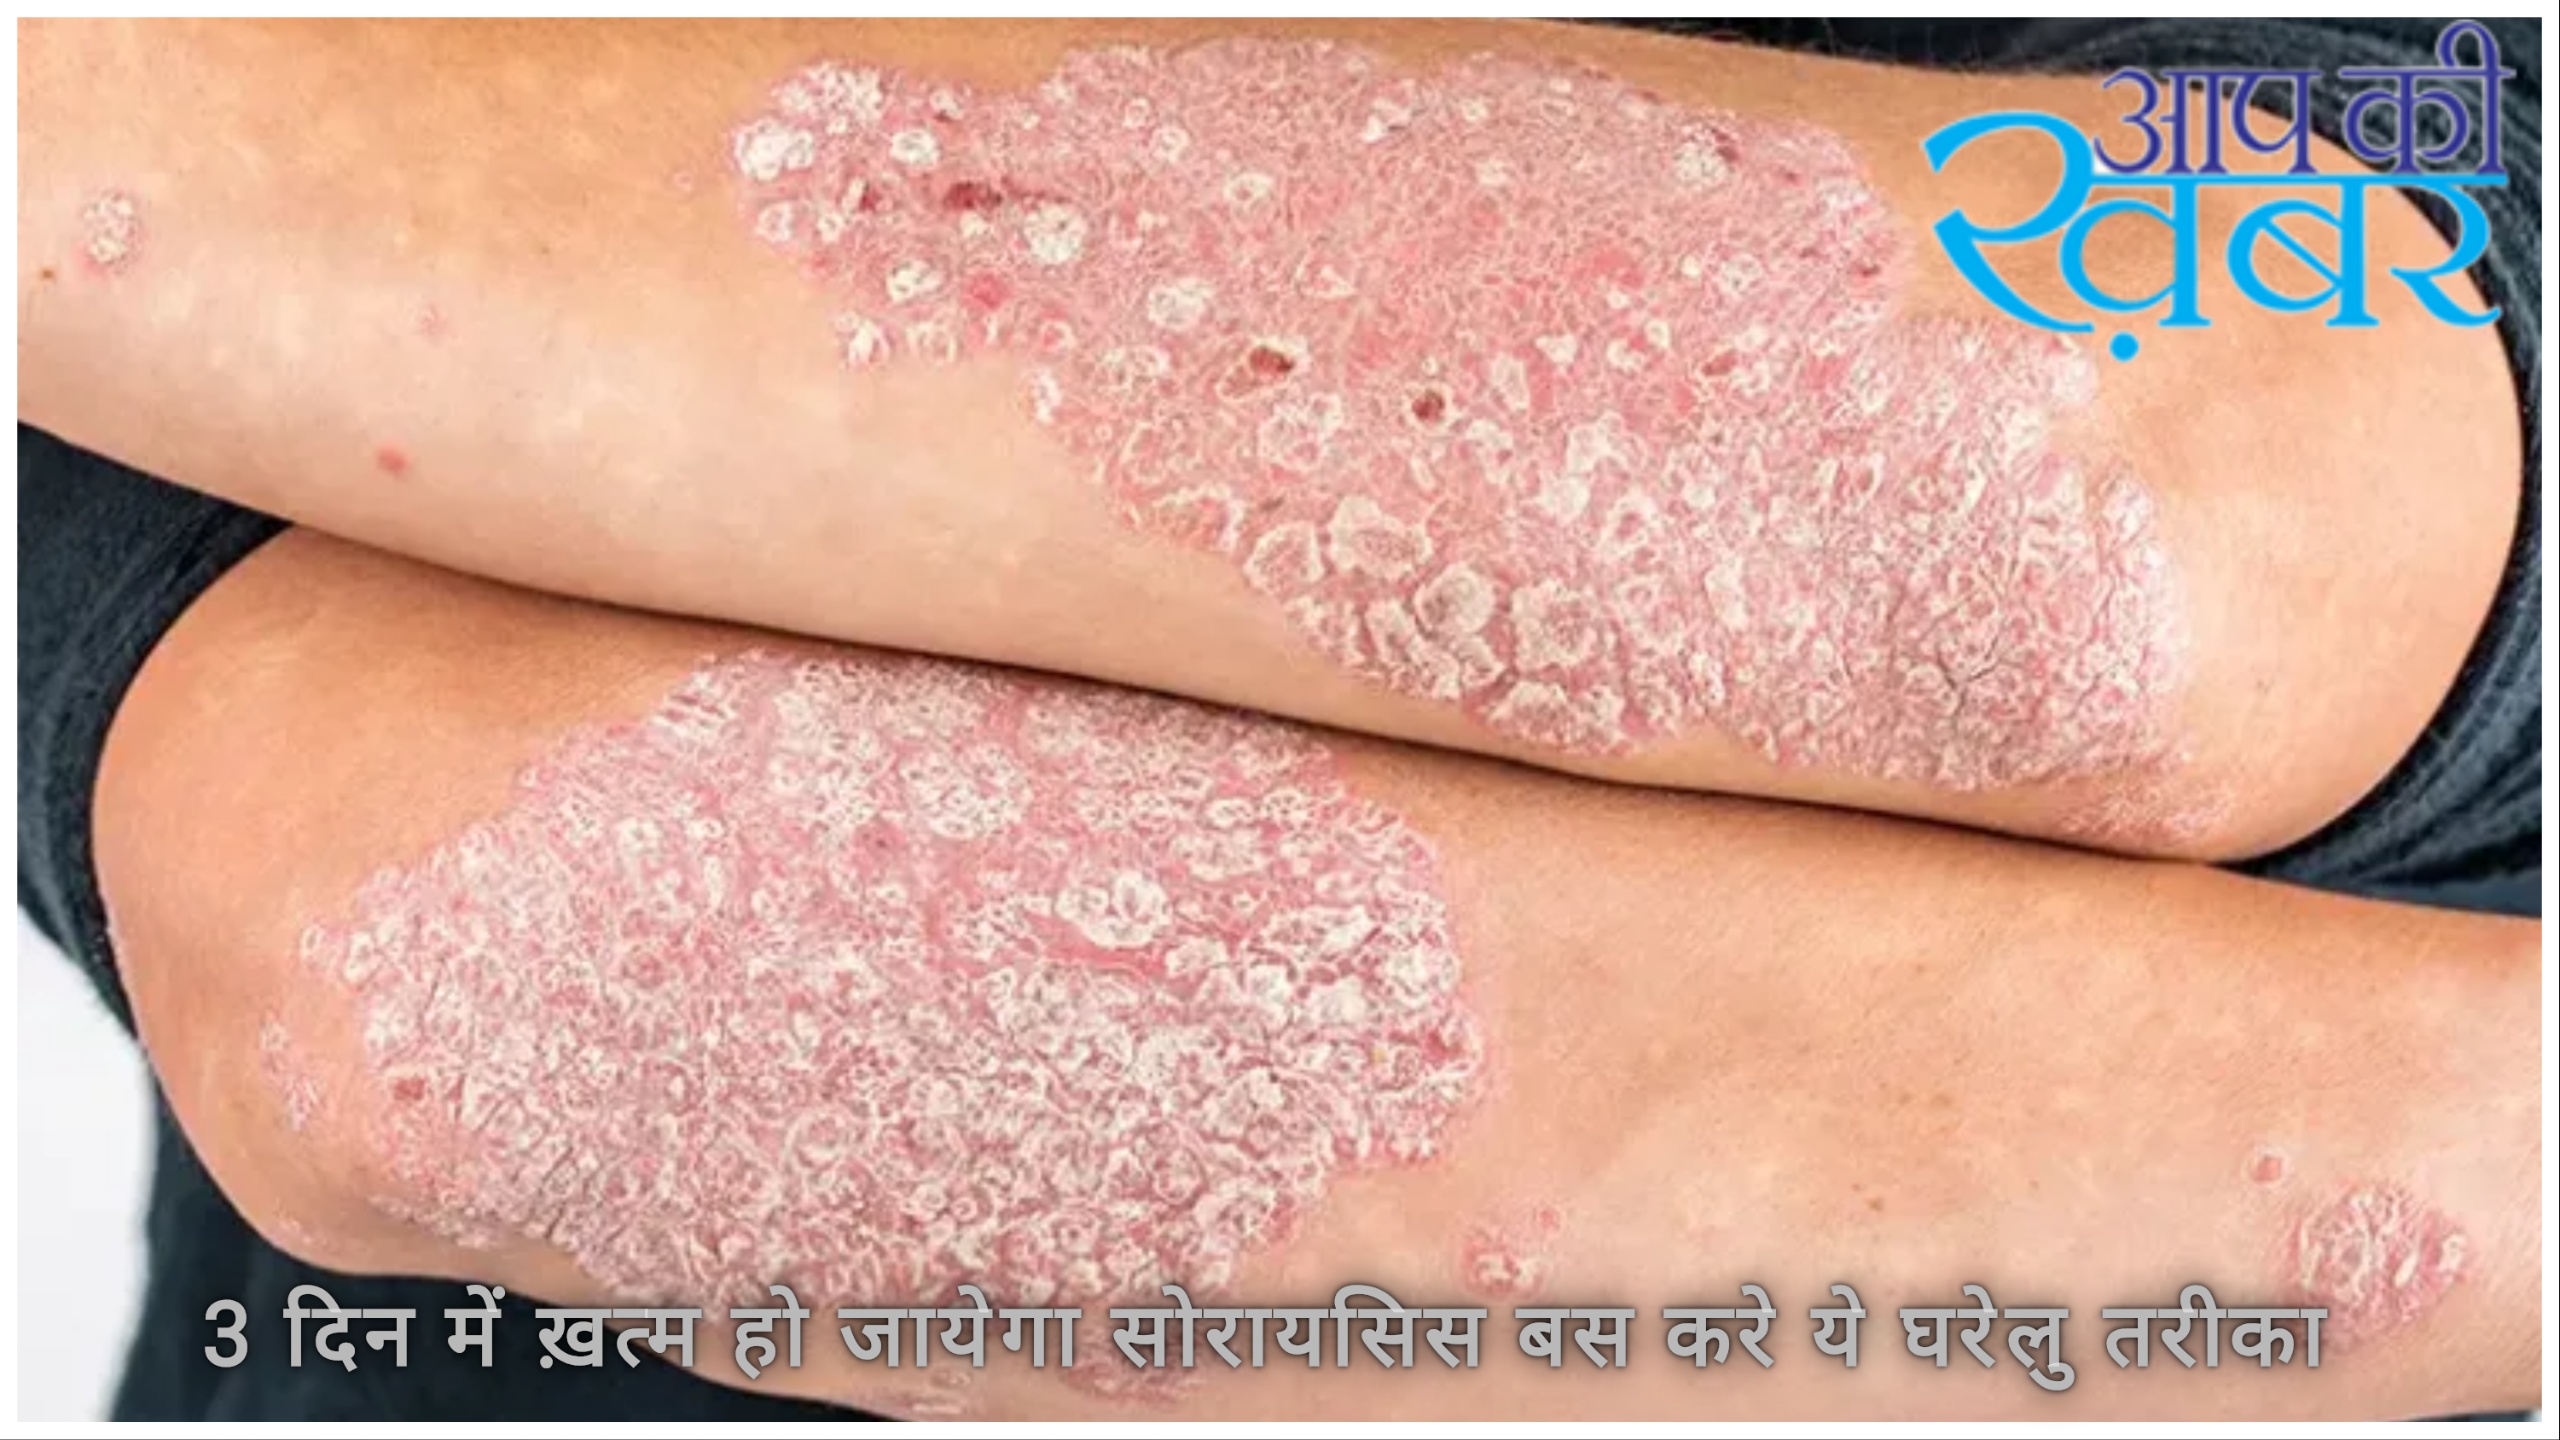 Psoriasis is a skin problem